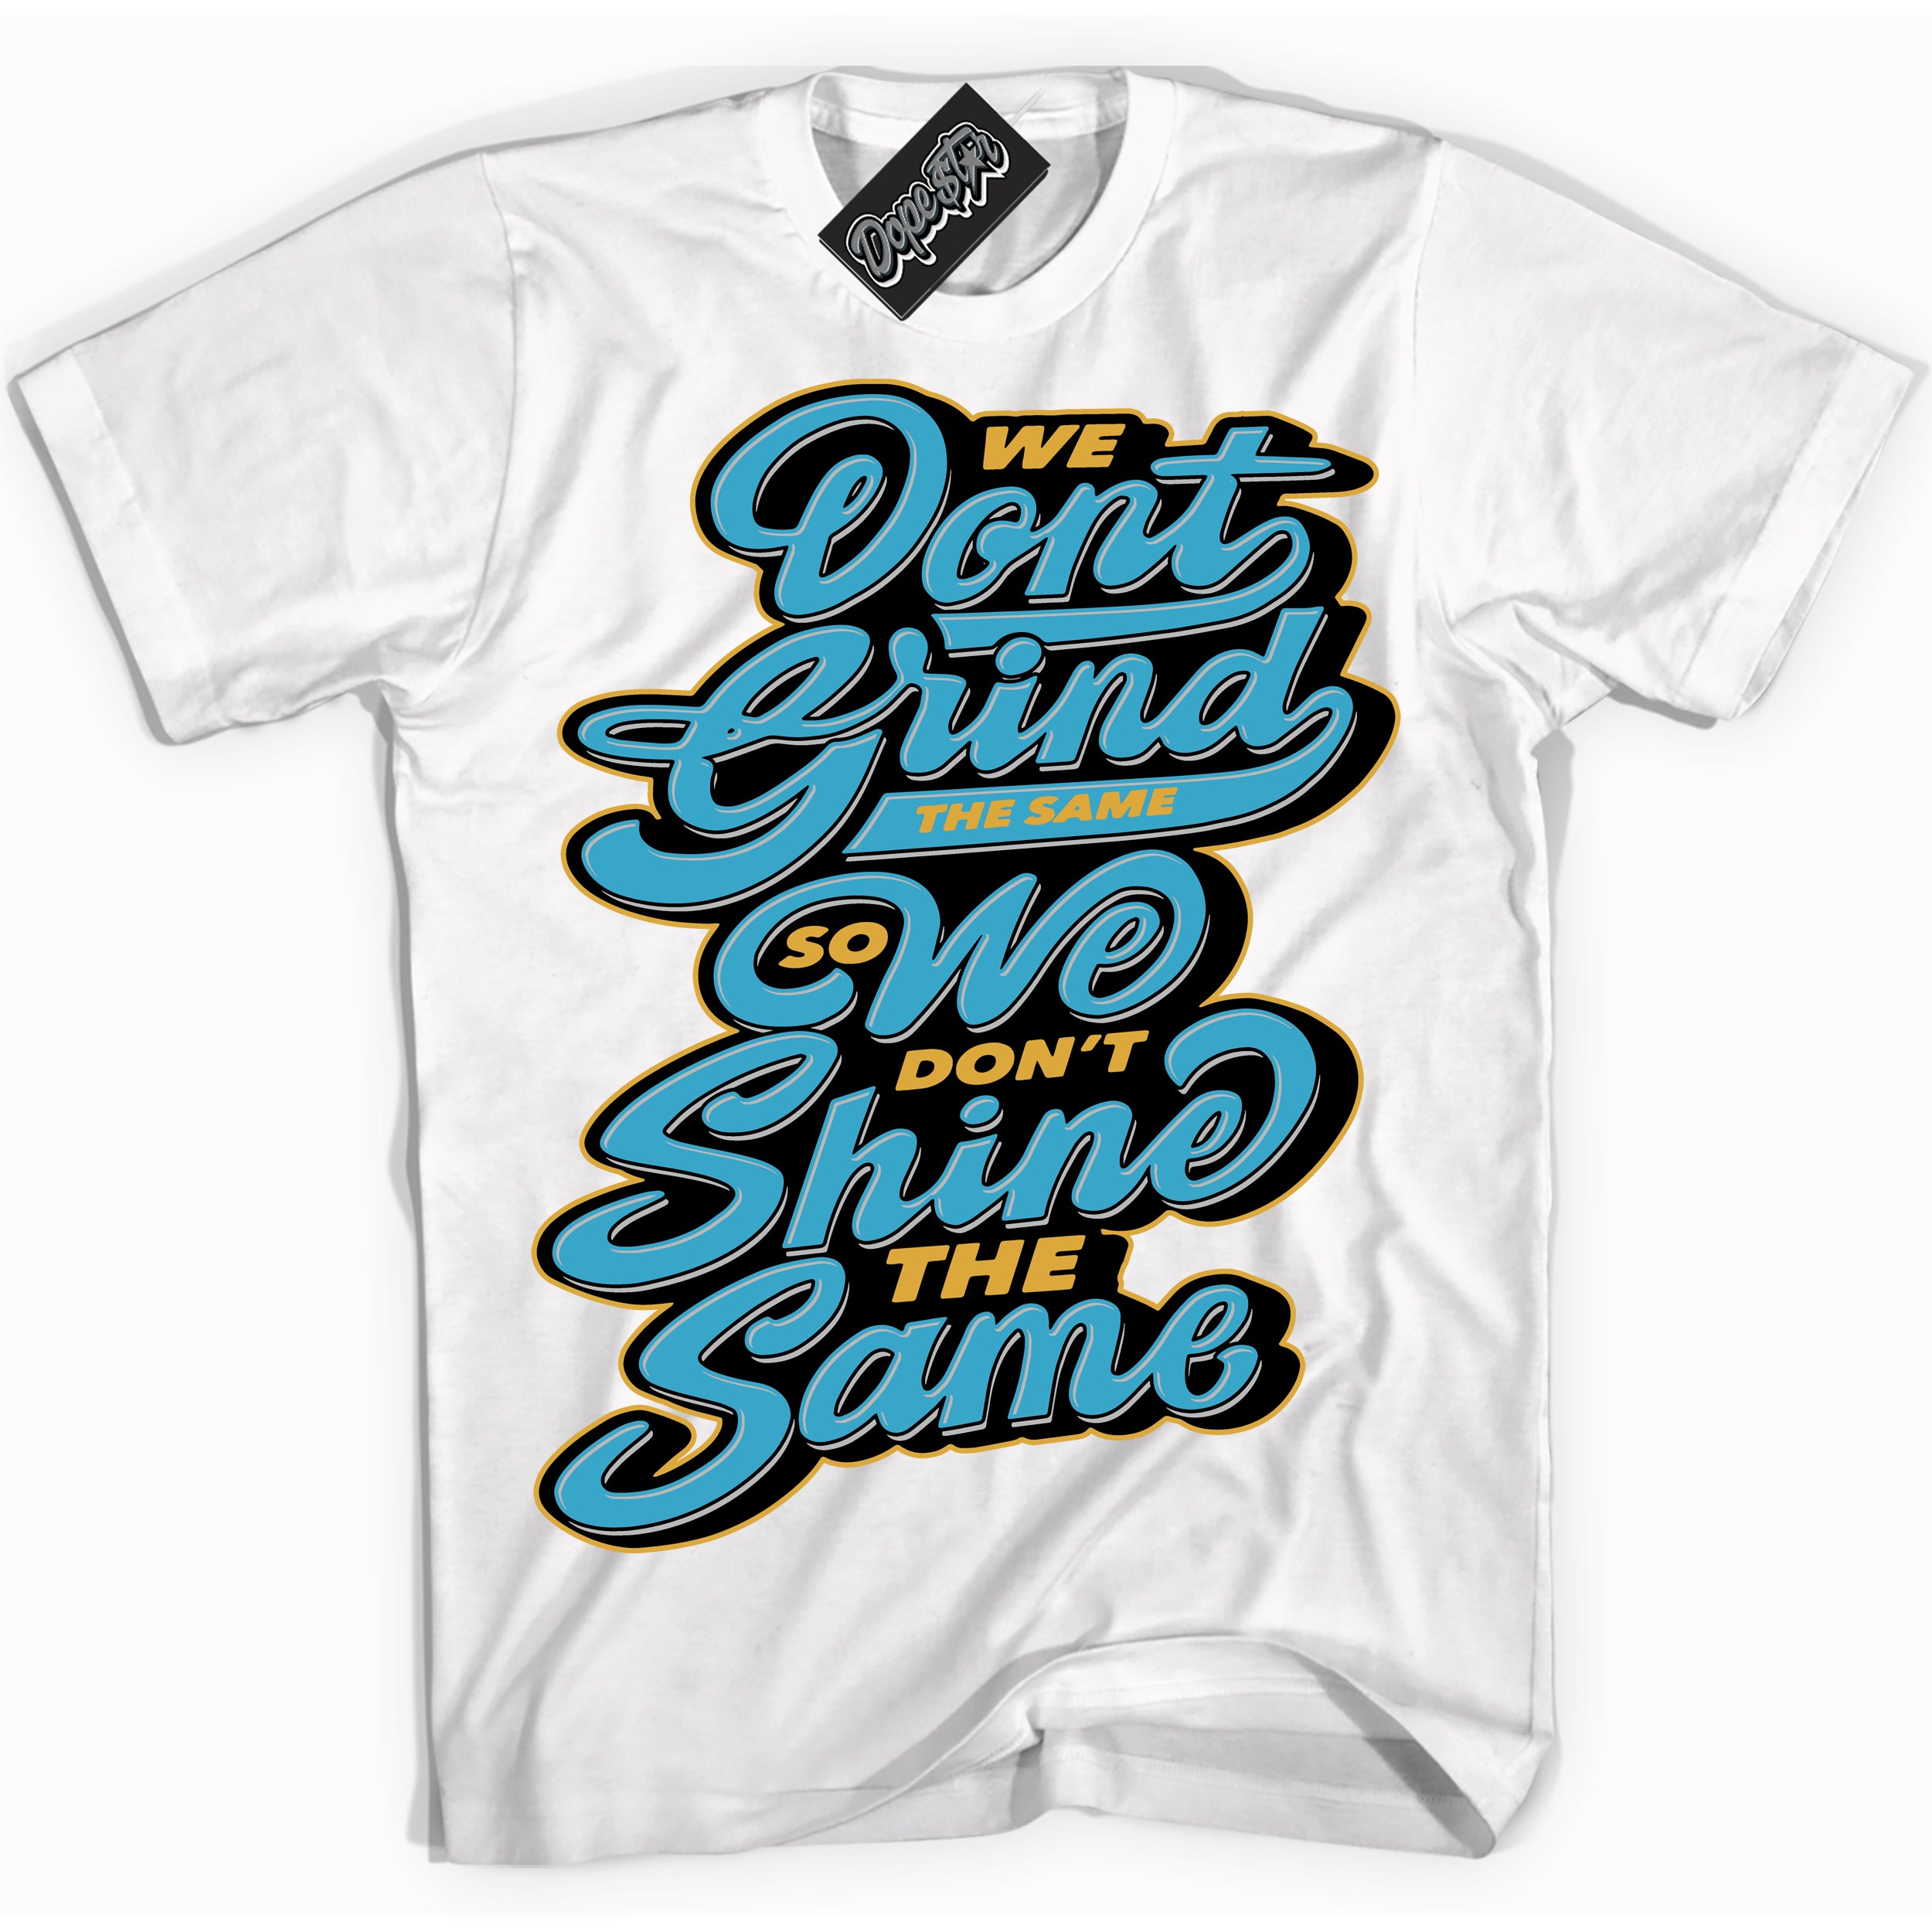 Cool White Shirt with “ Grind Shine” design that perfectly matches Aqua 5s Sneakers.